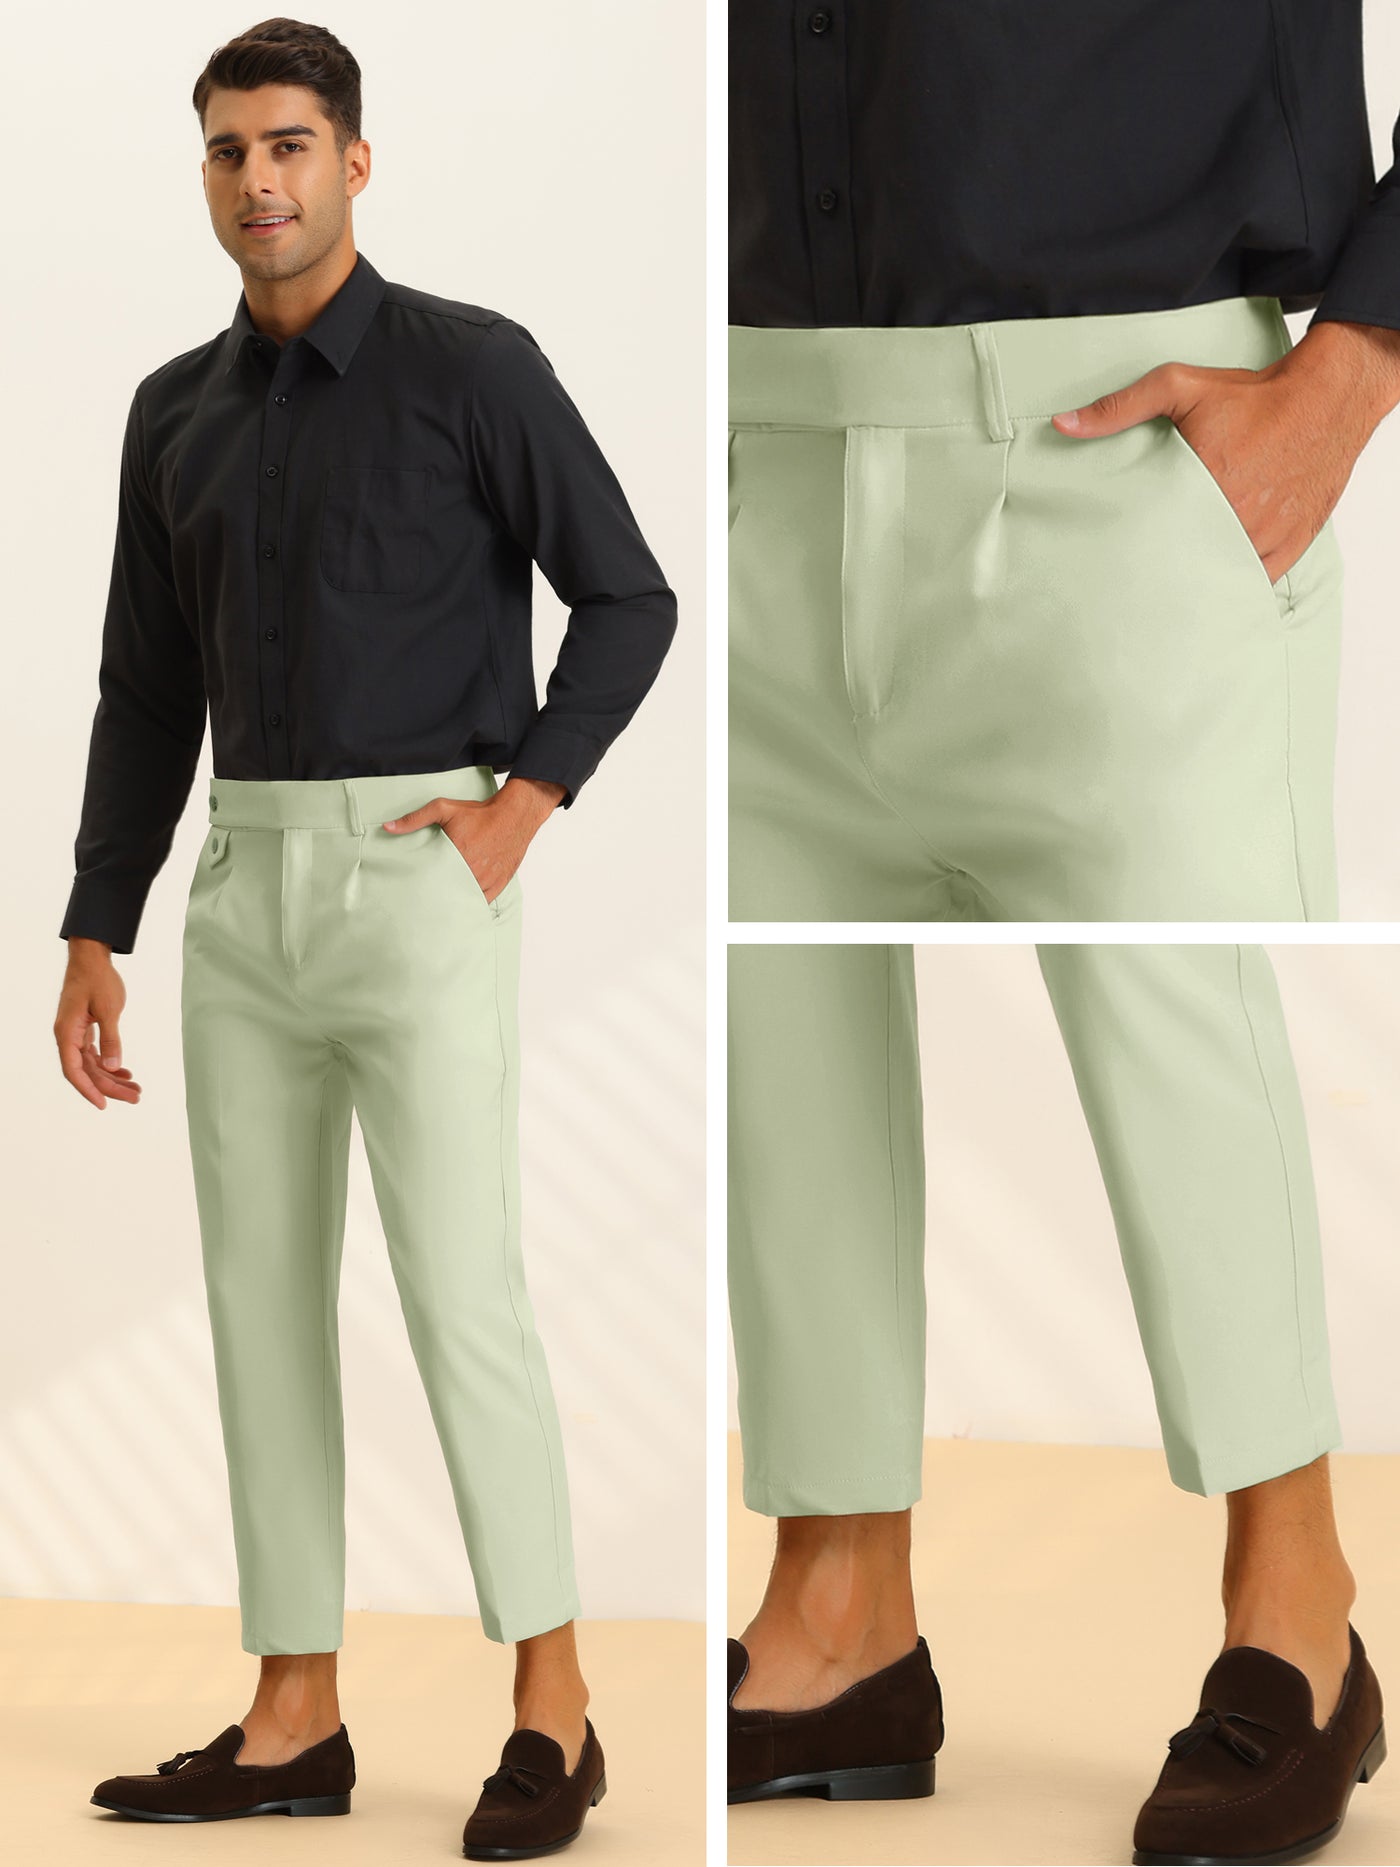 Bublédon Men's Pleated Front Solid Business Tapered Cropped Dress Pants